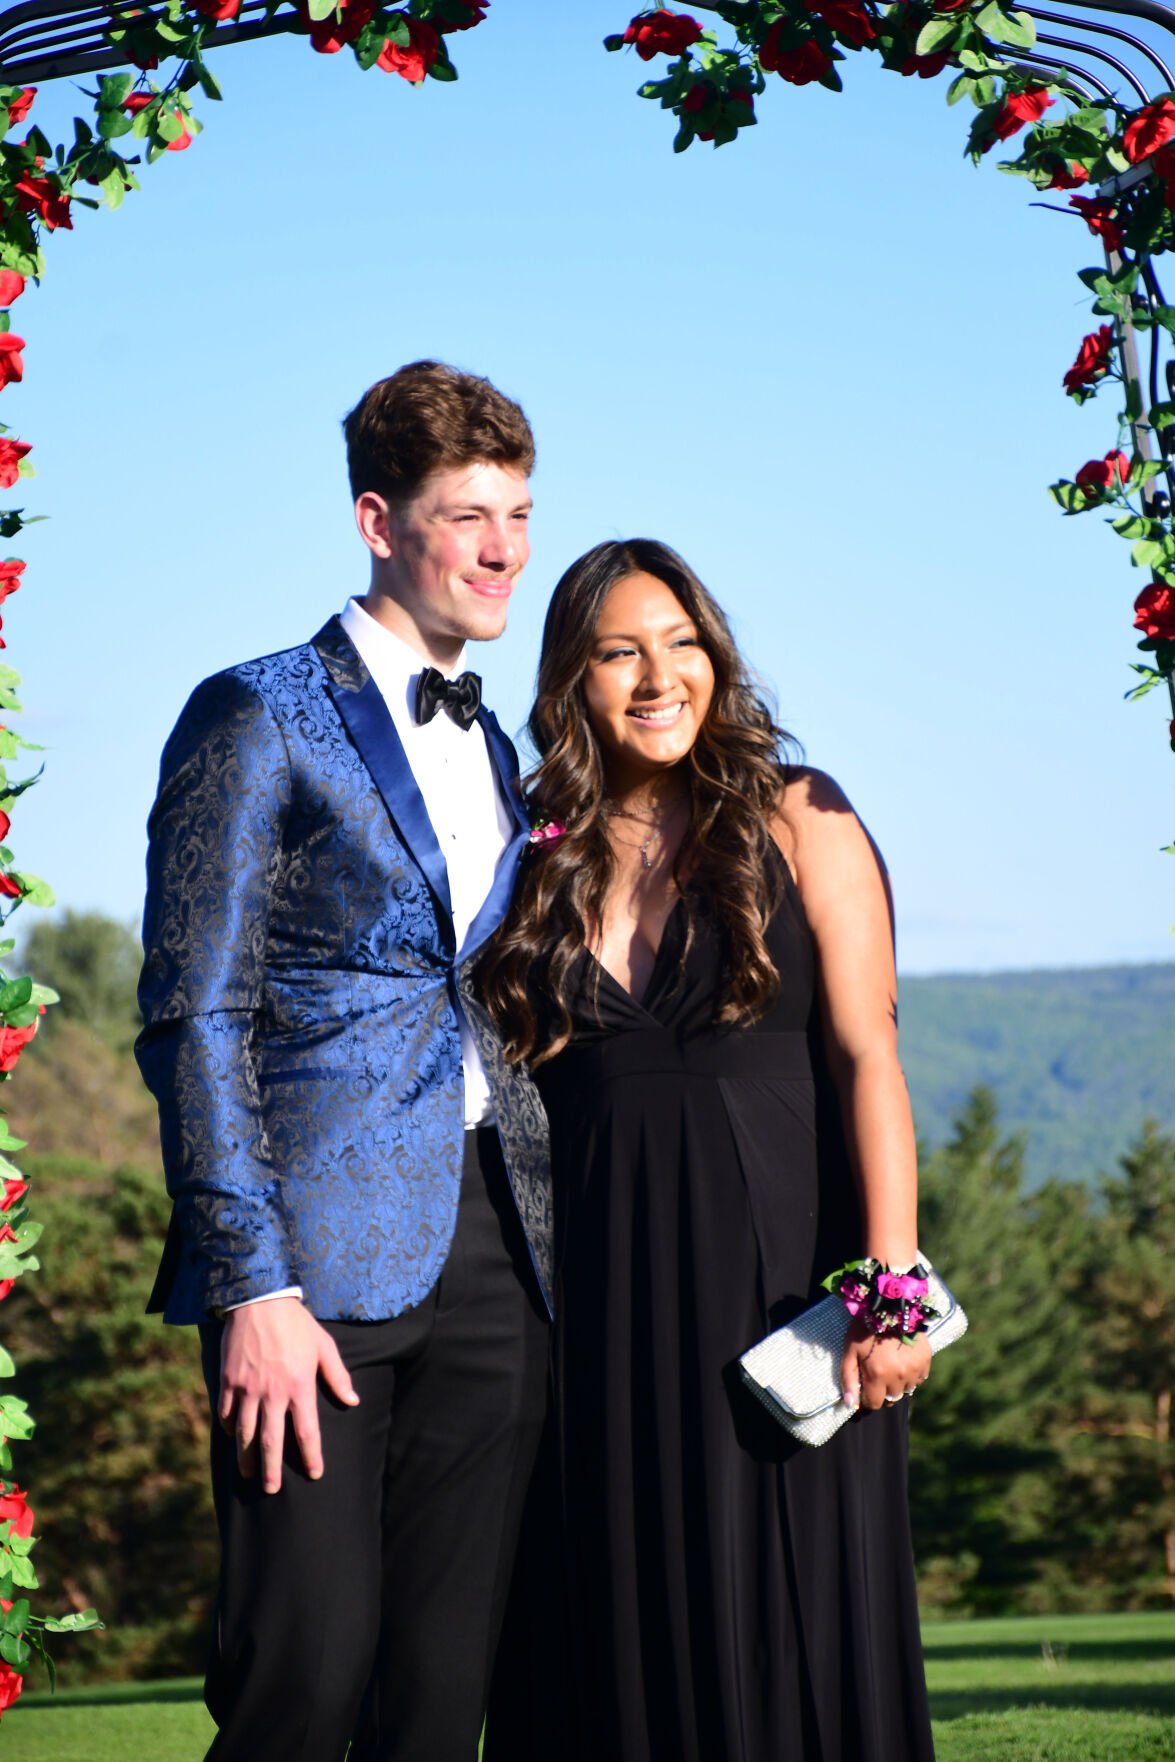 Prom couple Stock Photos, Royalty Free Prom couple Images | Depositphotos